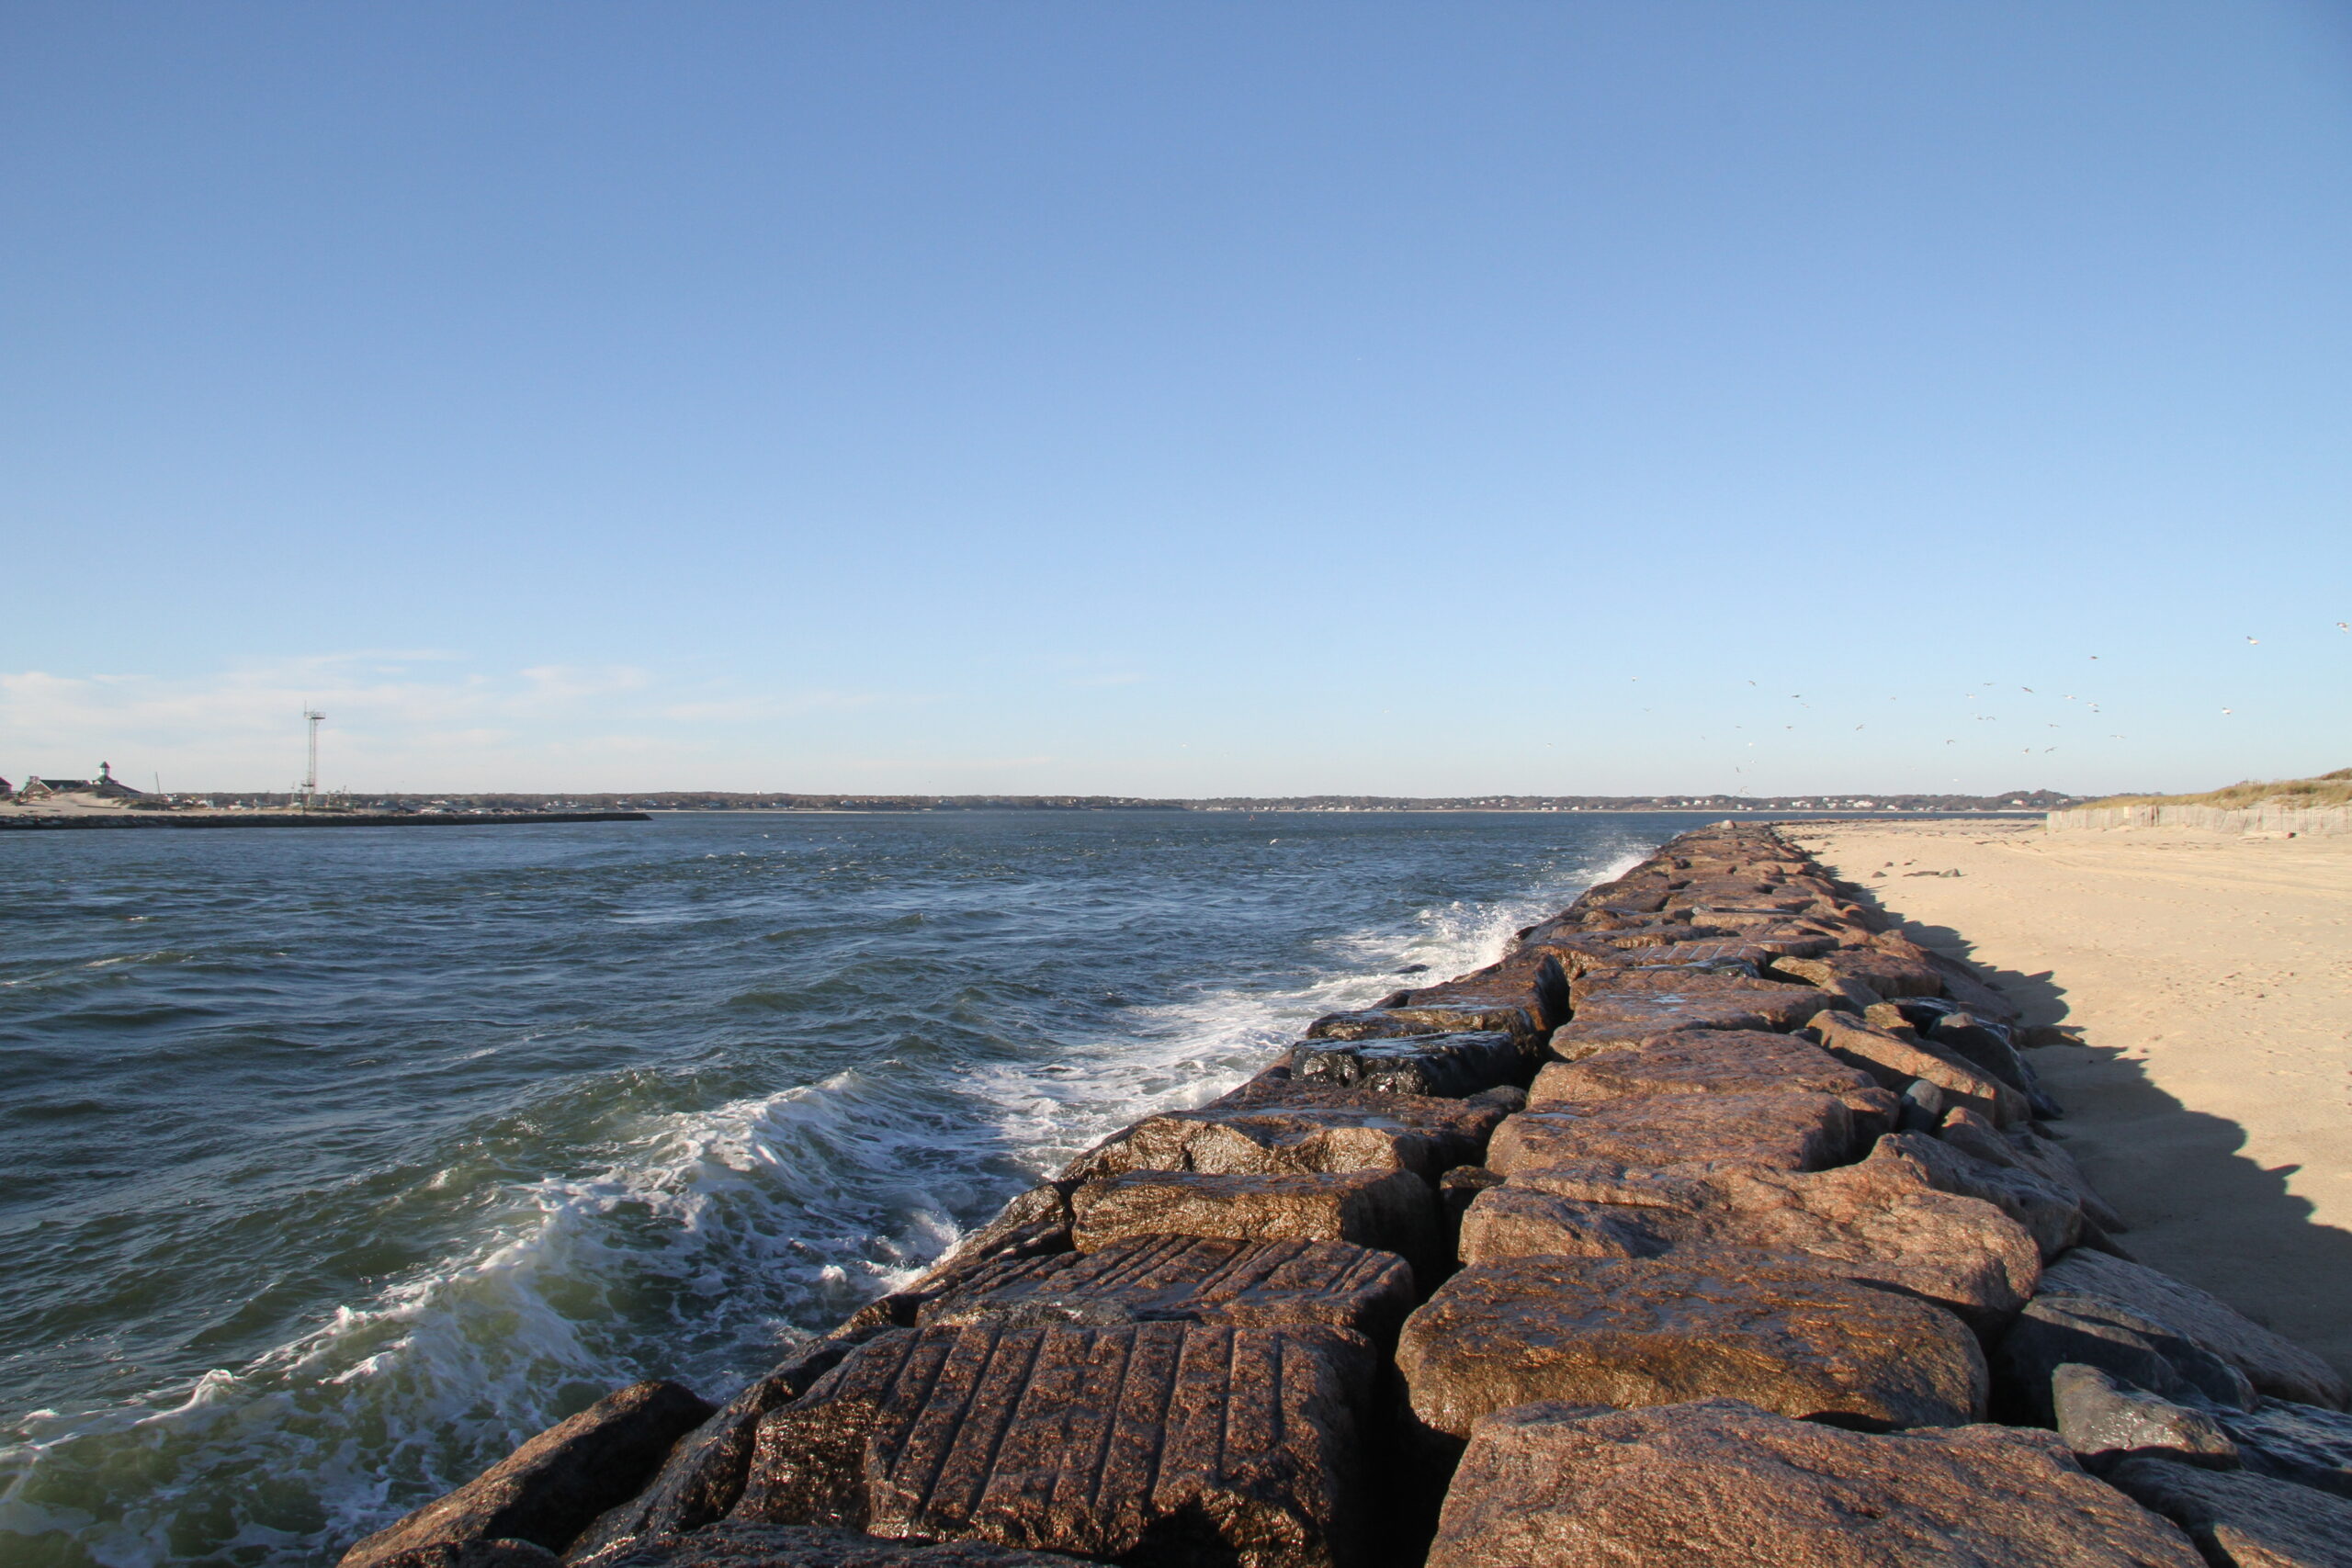 A study conducted in the wake of Superstorm Sandy recommends that New York consider erecting giant sea gates at each of Long Island's ocean inlets to protect against storm surge flooding during severe storms like hurricanes.